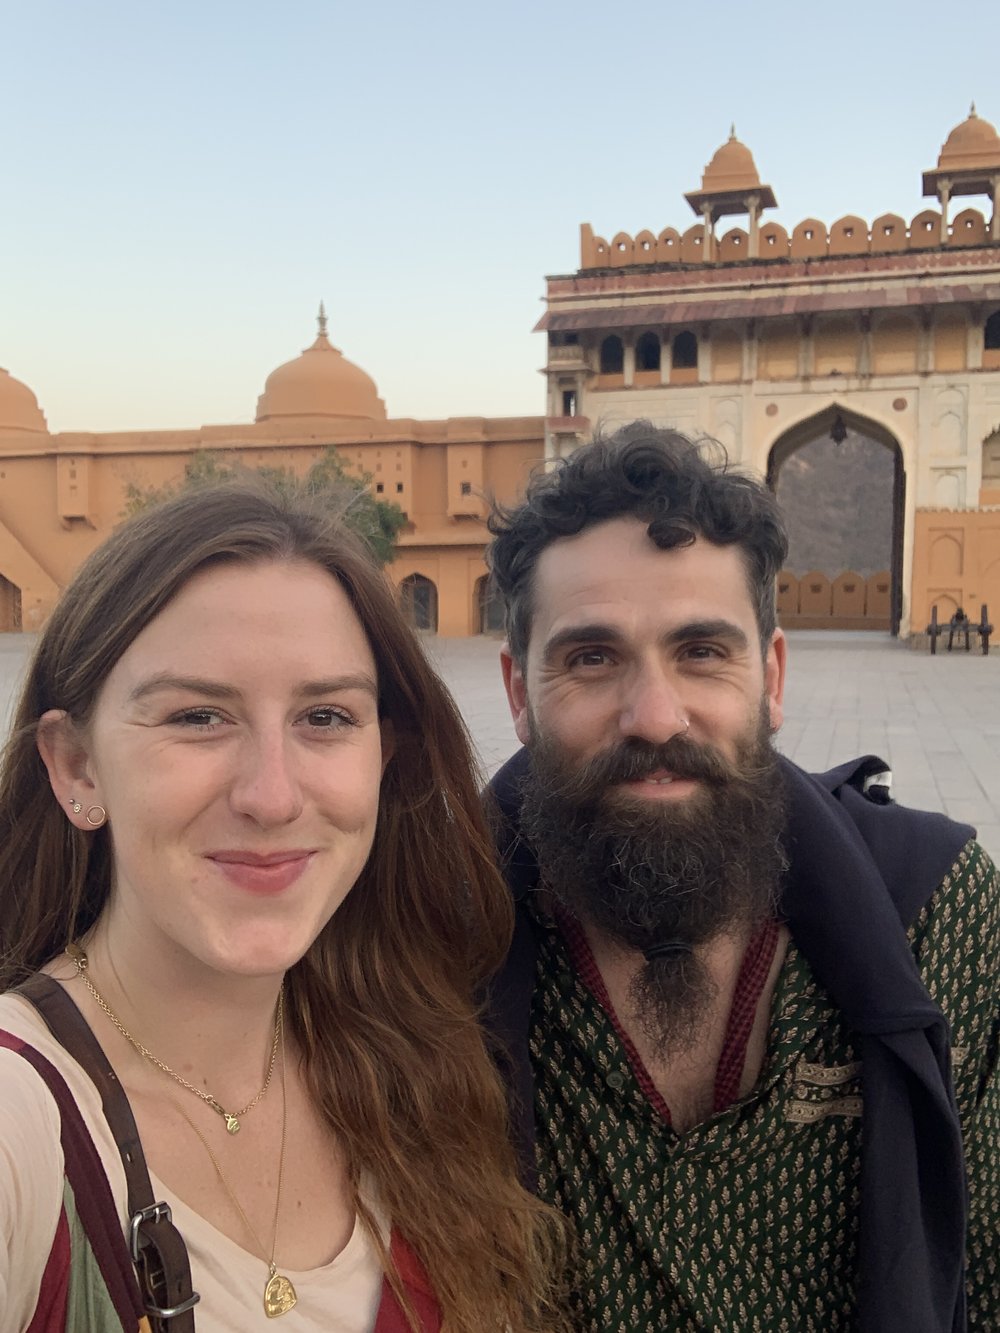 Sight seeing in India